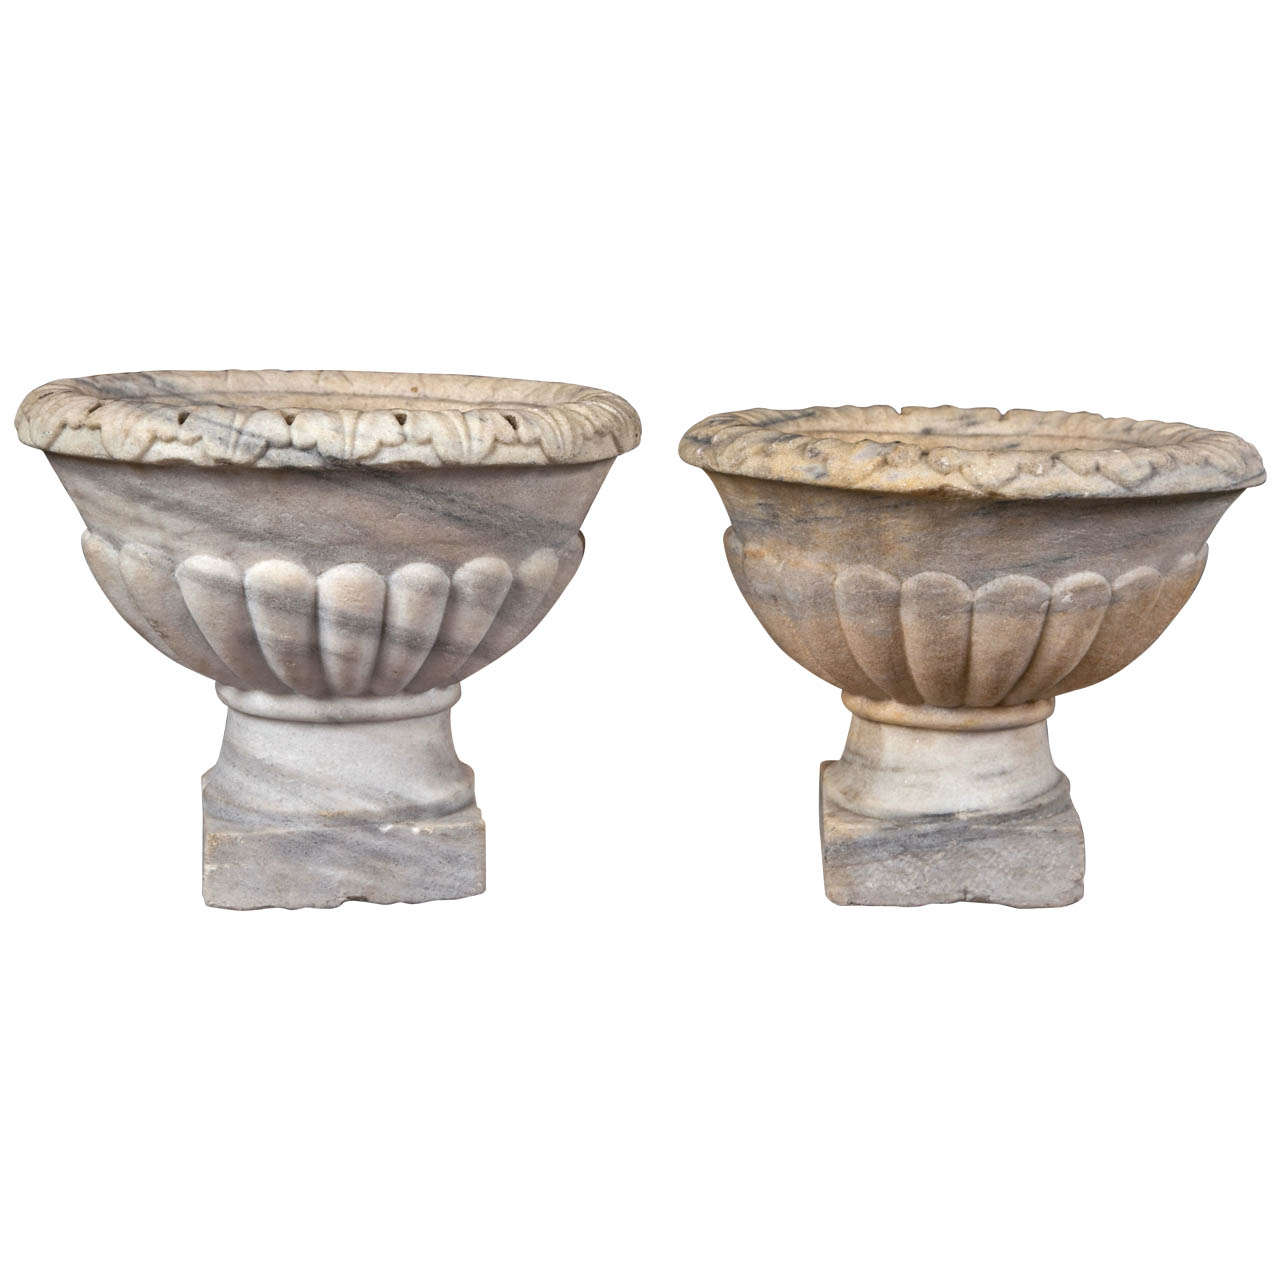 Two Similar Antique Marble Urns For Sale